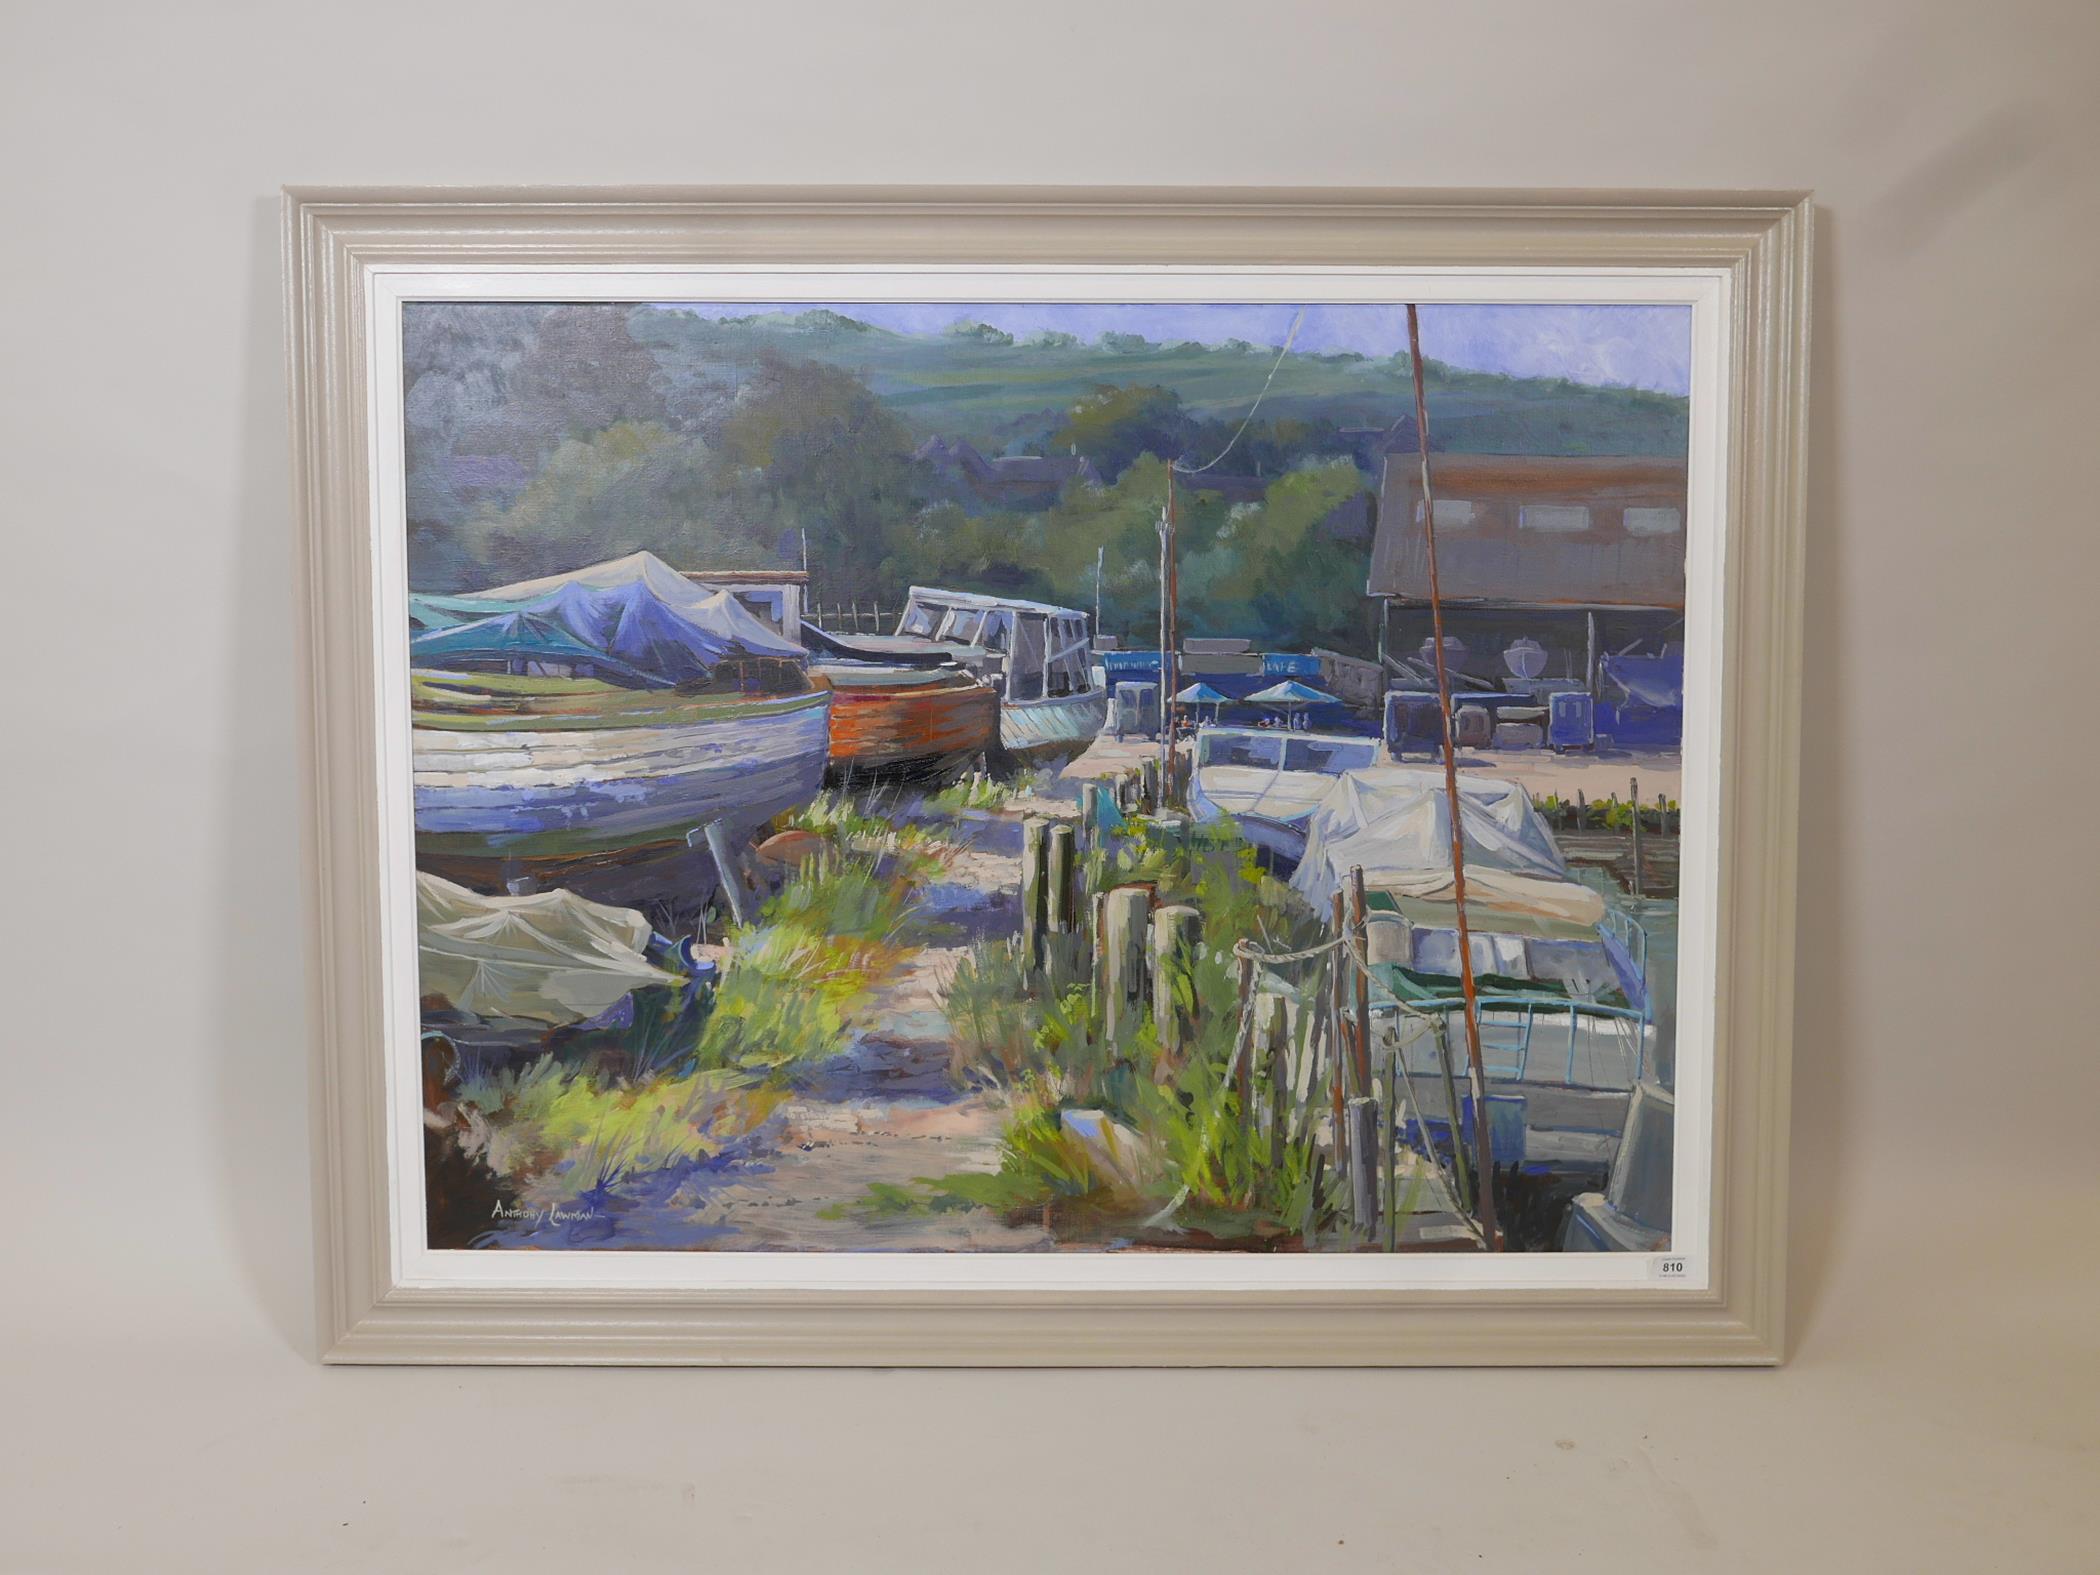 Anthony Lawman (British, b.1943), 'Boats in the Marina', signed lower left, oil on canvas, 30" x 40" - Image 3 of 5